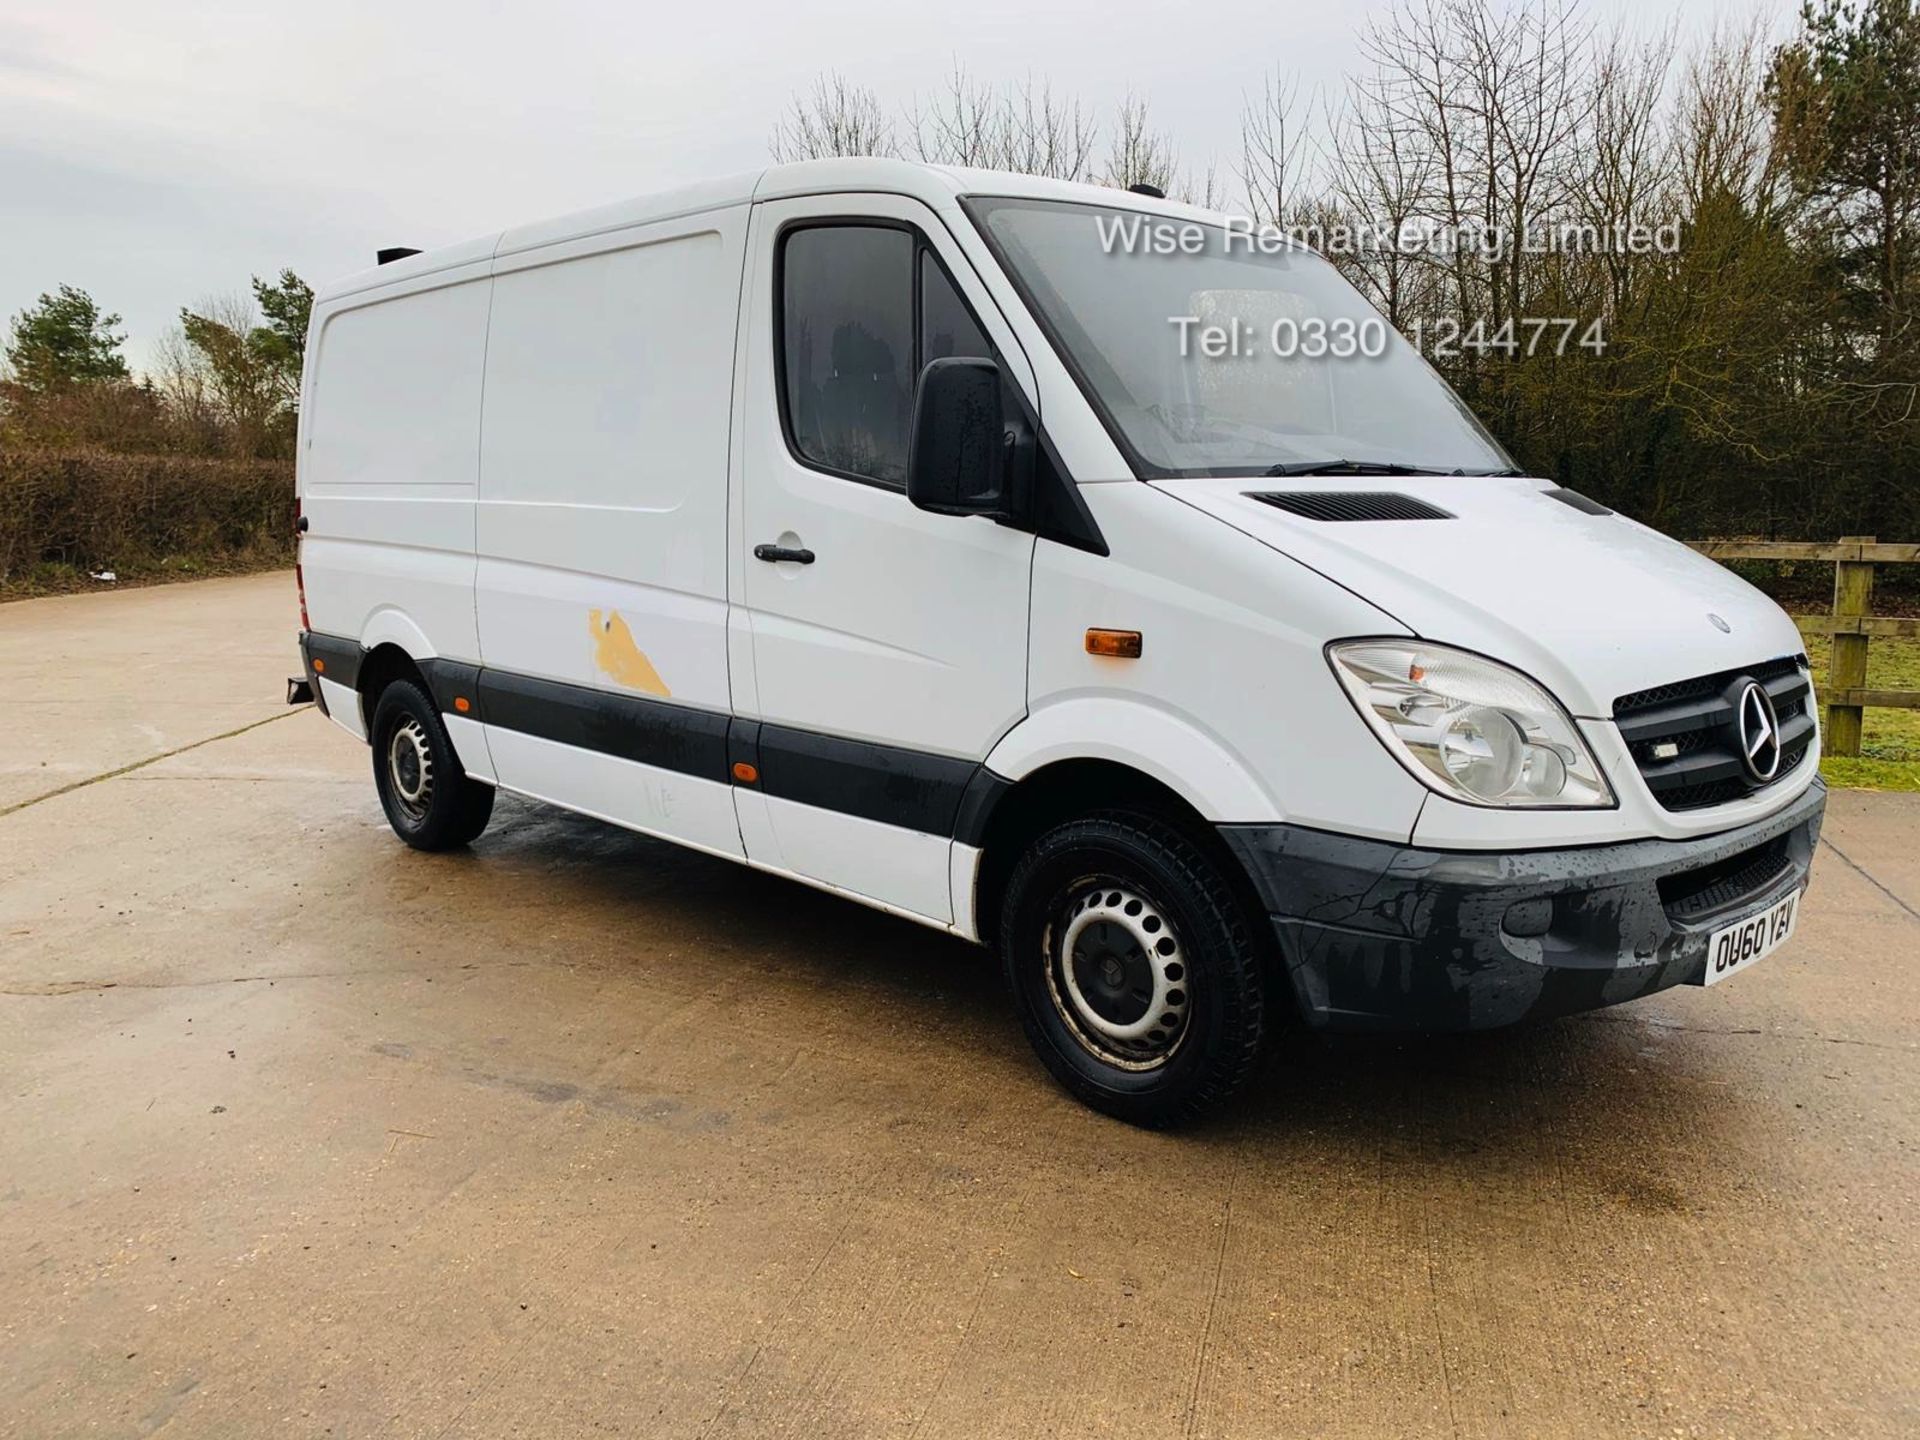 Mercedes Sprinter 313 2.1 CDI *Automatic Triptronic Gearbox* - 2011 Model - Ply Lined - Image 2 of 15